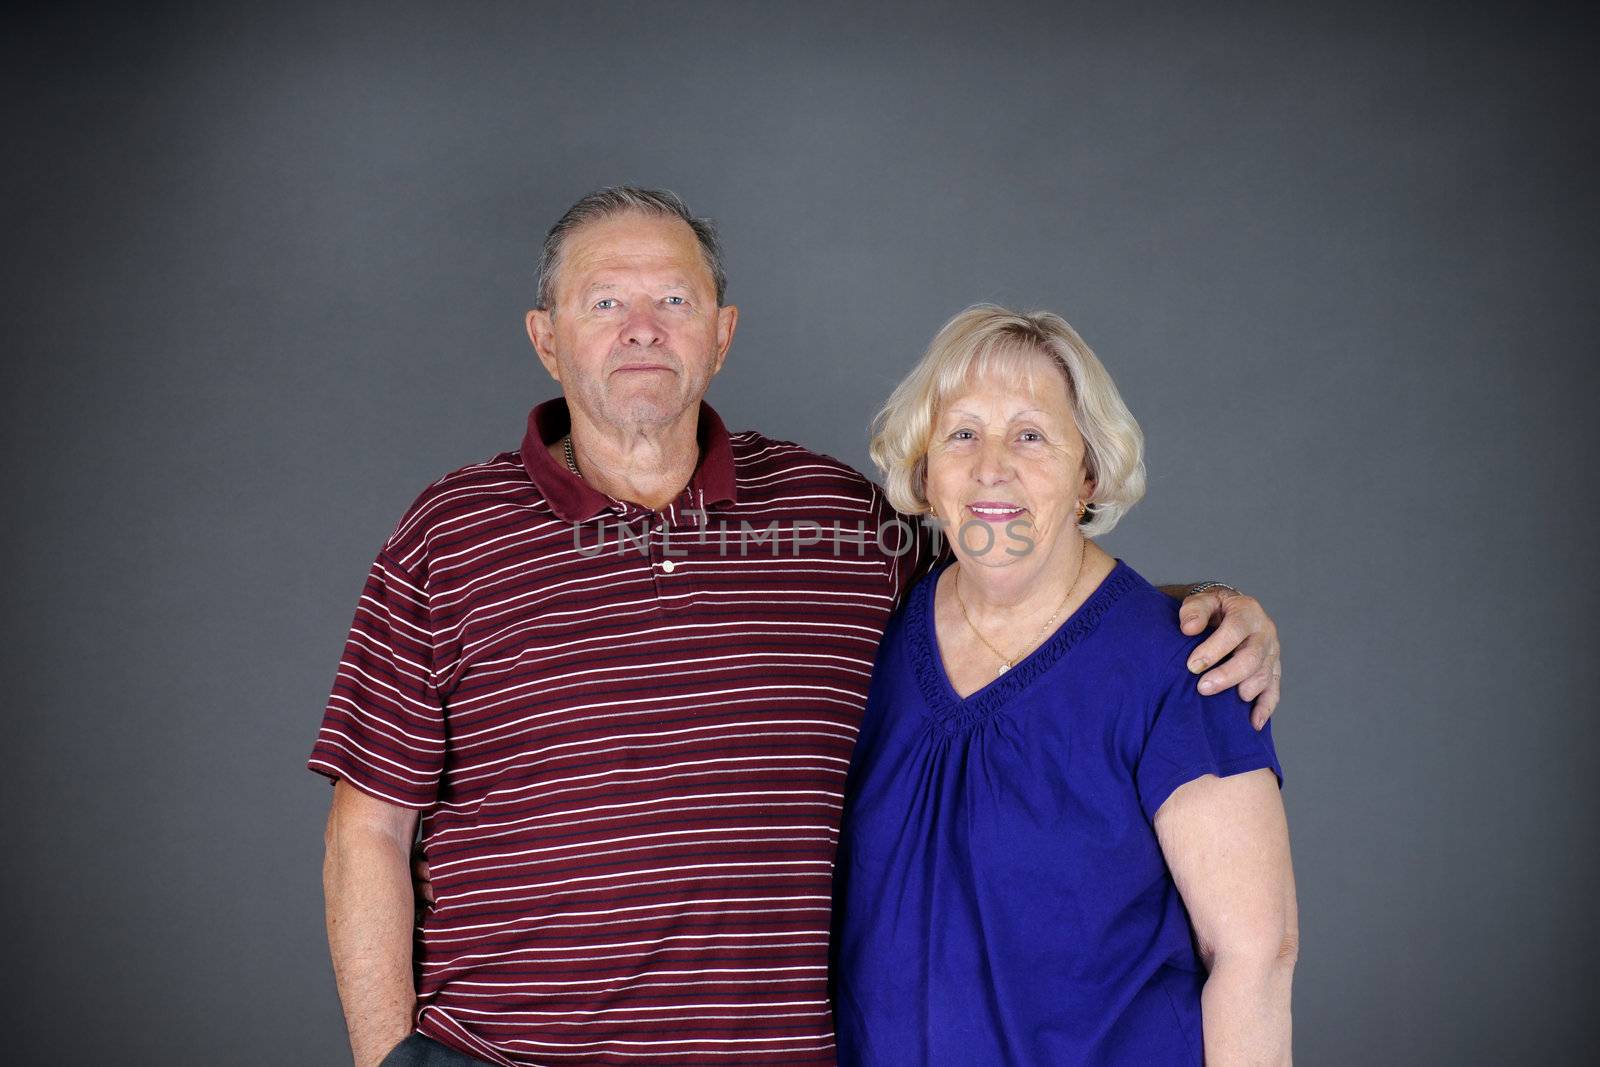 Happy and healthy senior couple looking at camera, studio shot over grey background.